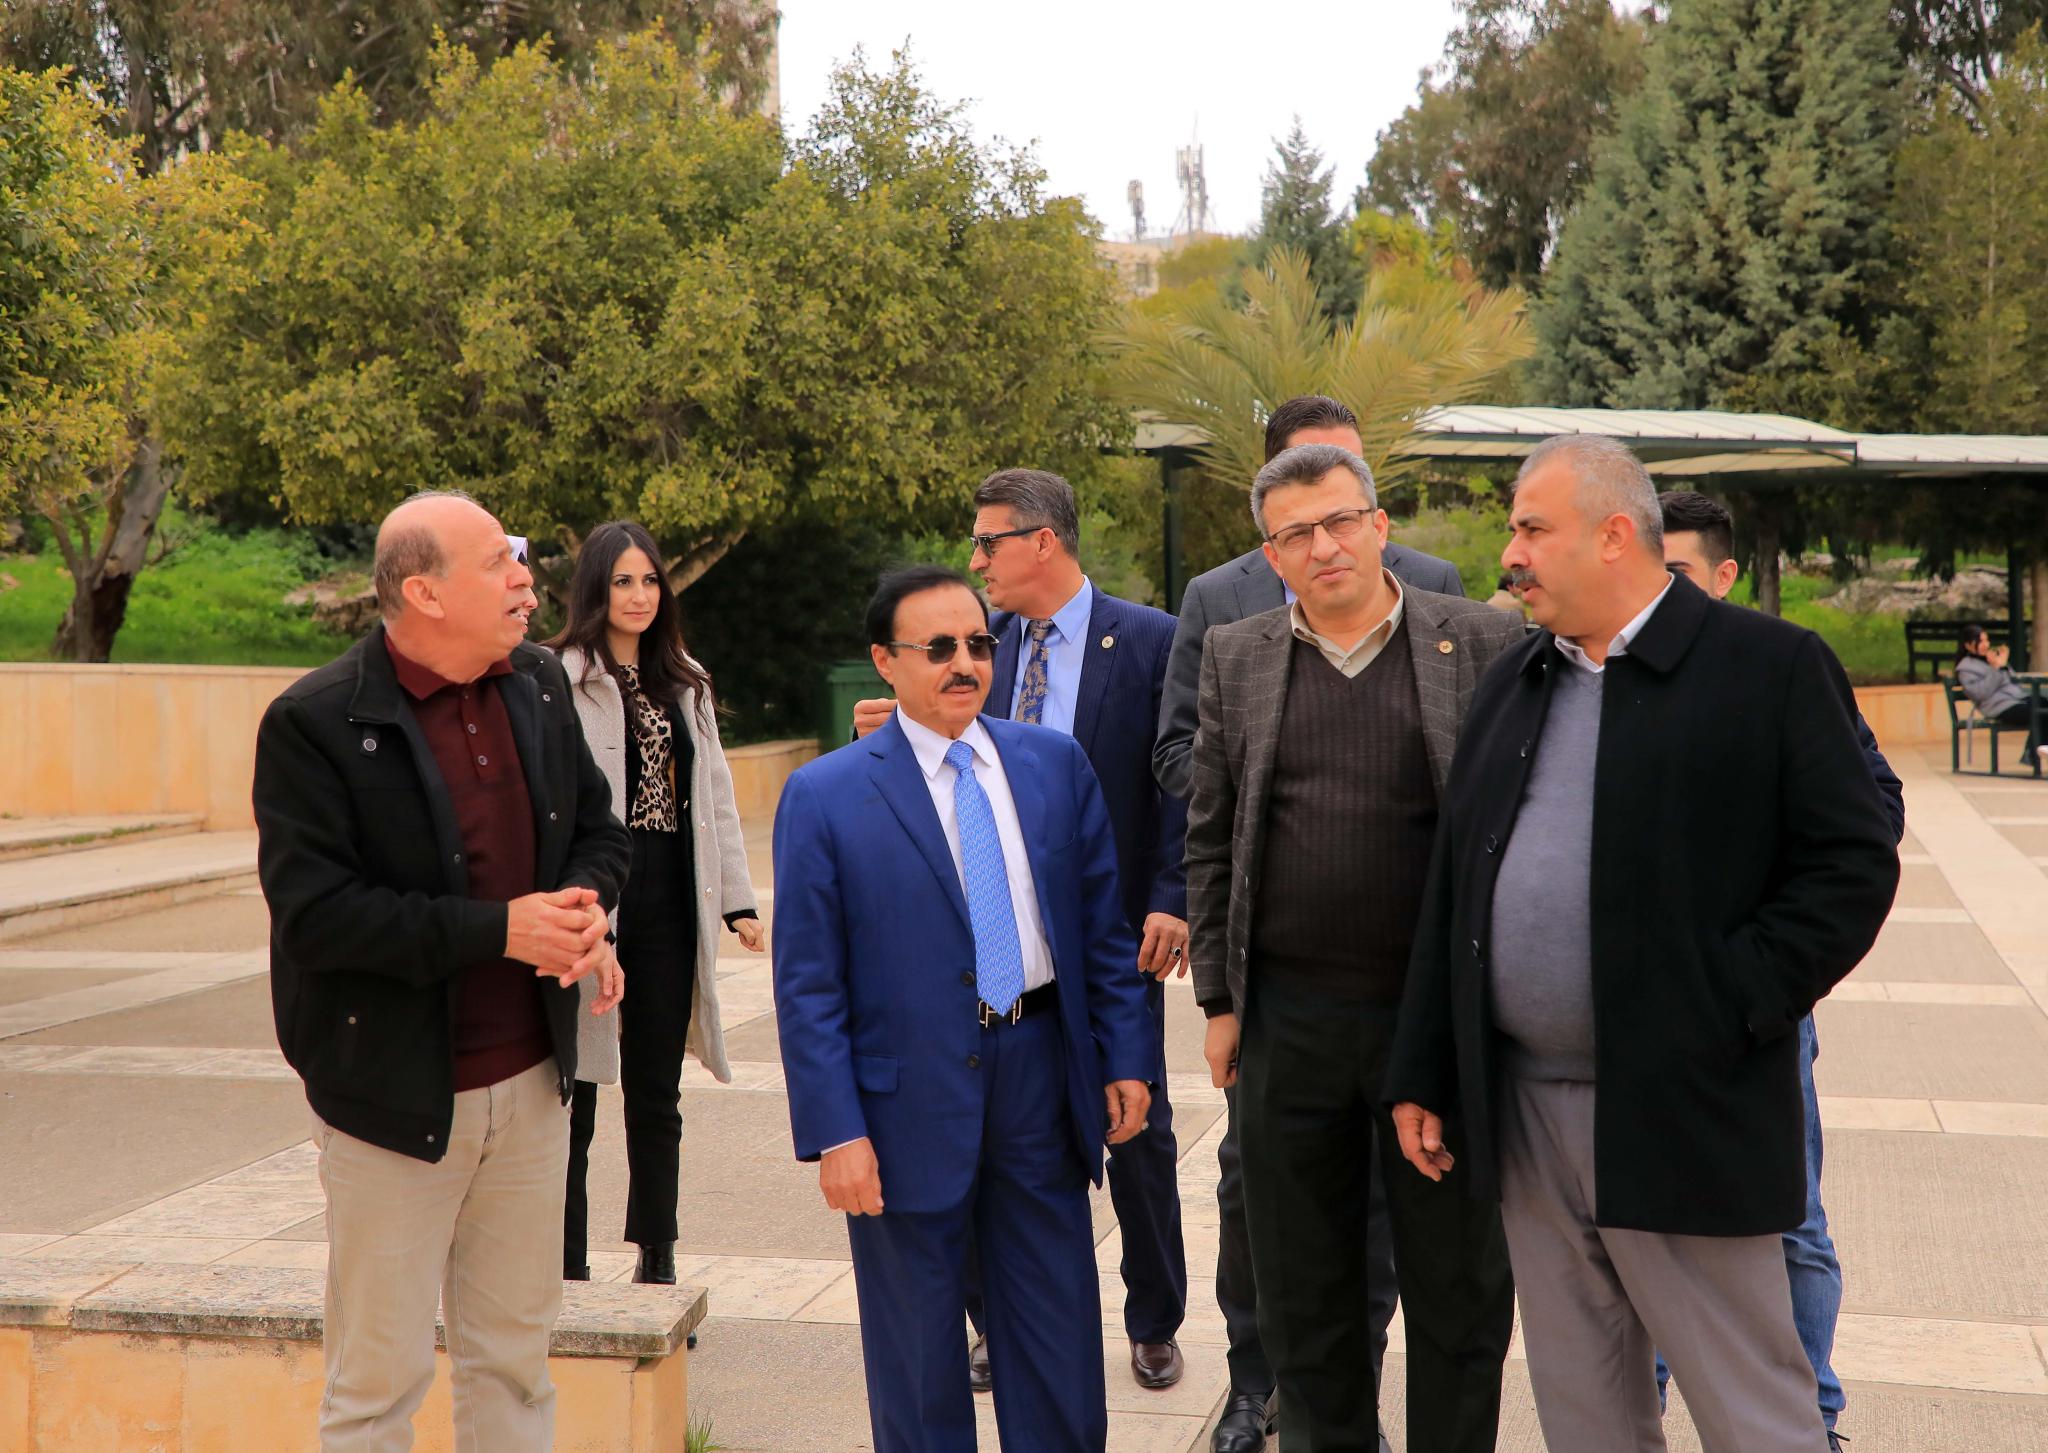 The Founding Chairman of the Board of Directors Visits AAUP- Jenin Campus to Check the Developmental Projects in the Campus